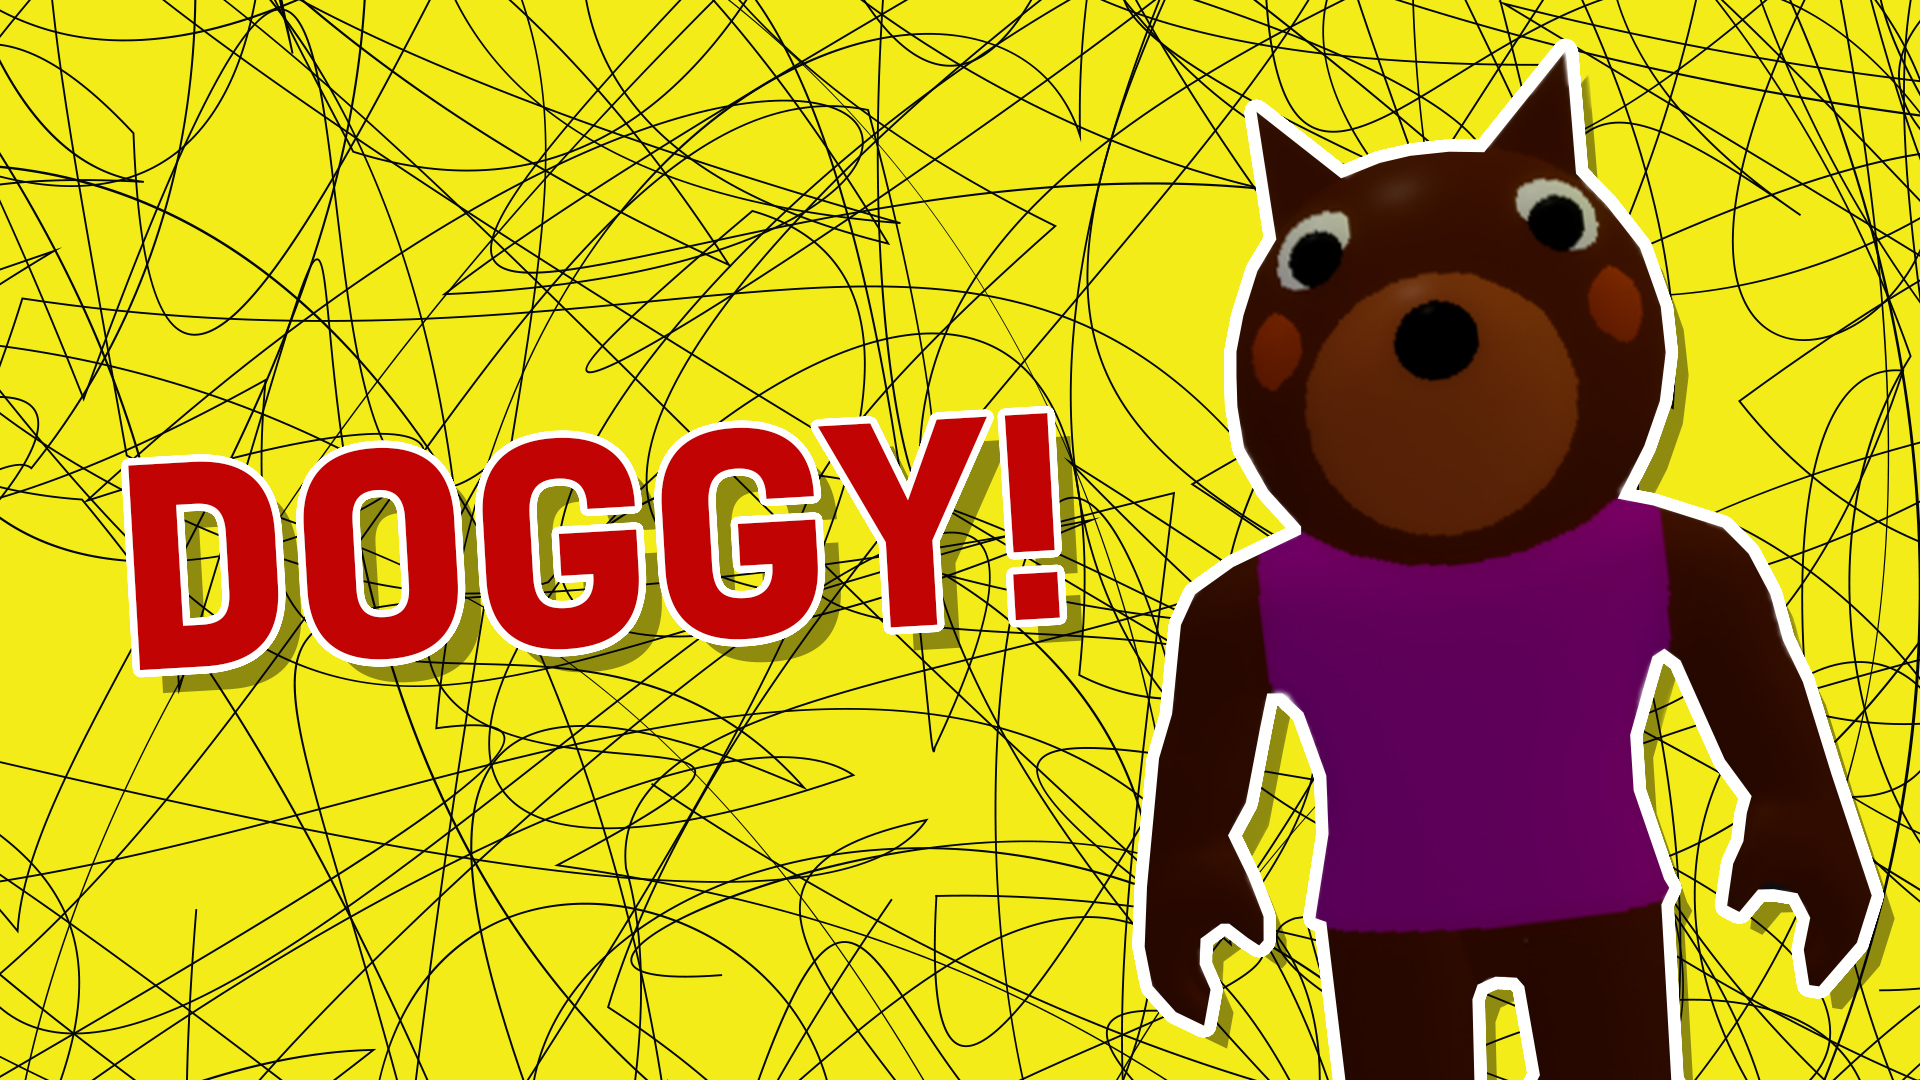 What Roblox Piggy Character are You?